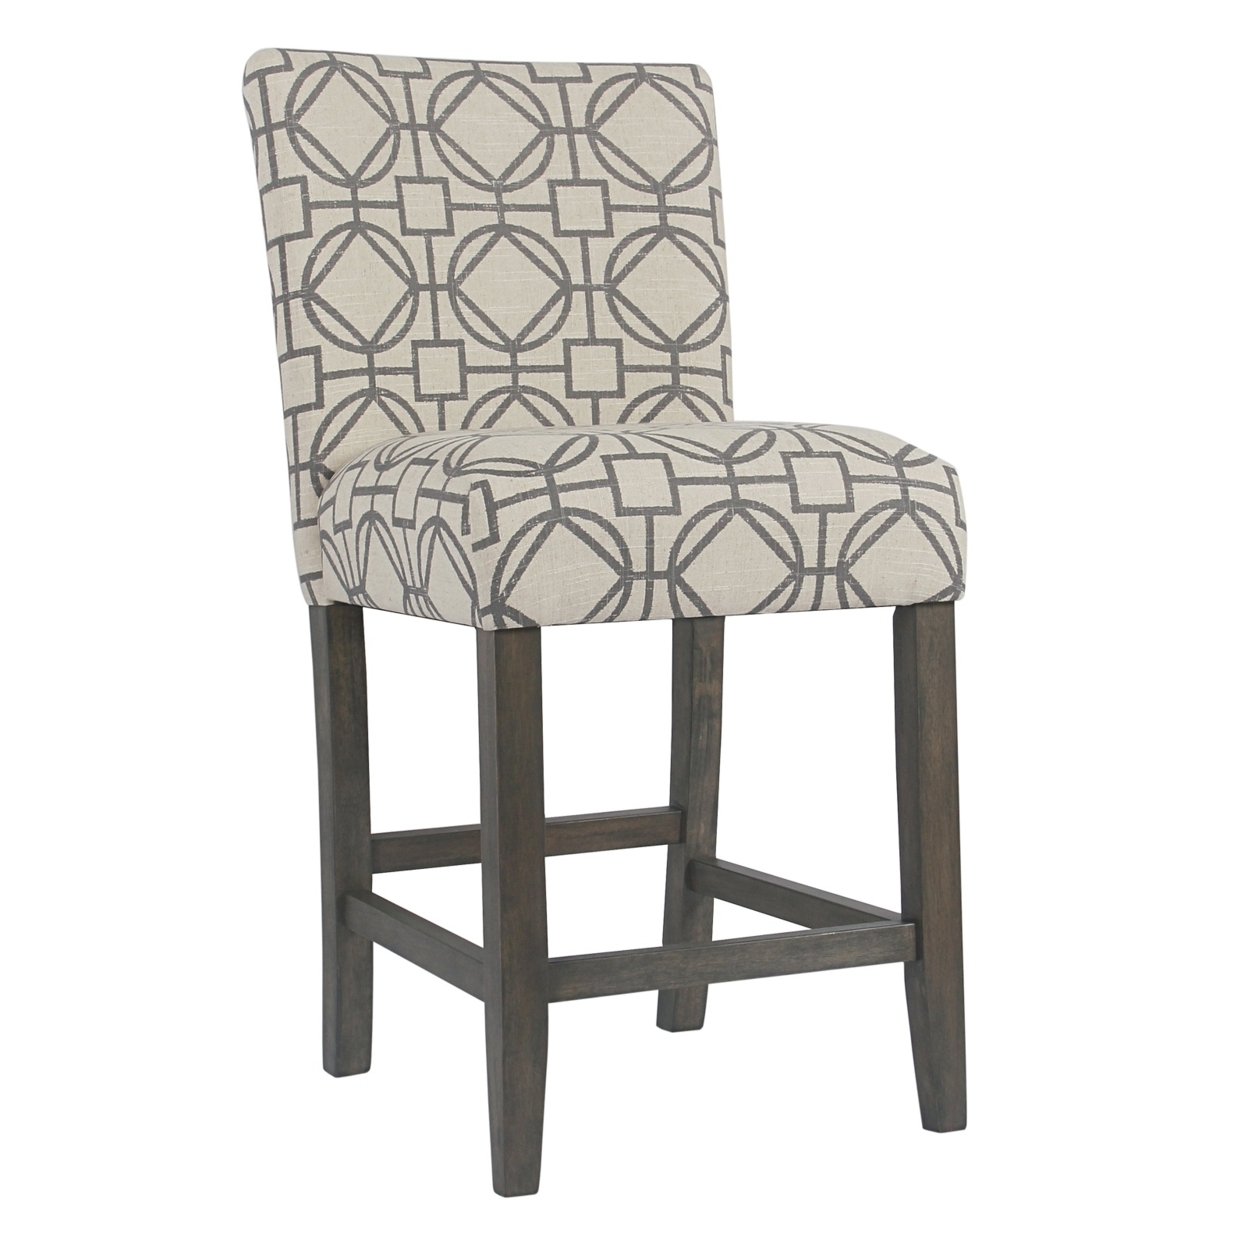 Wooden 24 Inch Counter Height Stool With Trellis Pattern Fabric Upholstery, Cream And Gray- Saltoro Sherpi